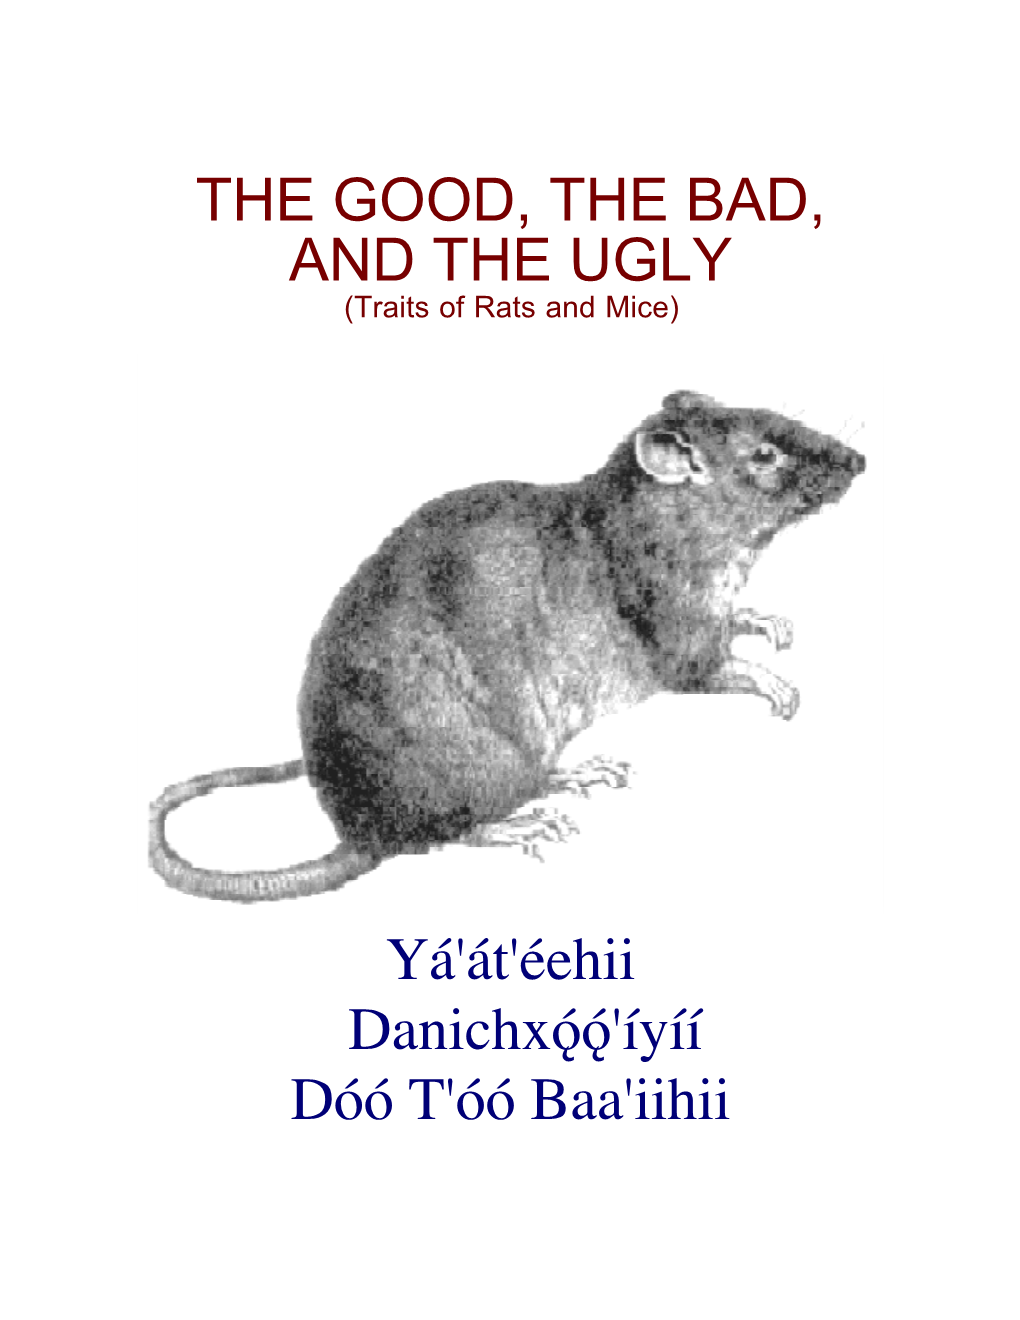 THE GOOD, the BAD, and the UGLY (Traits of Rats and Mice)